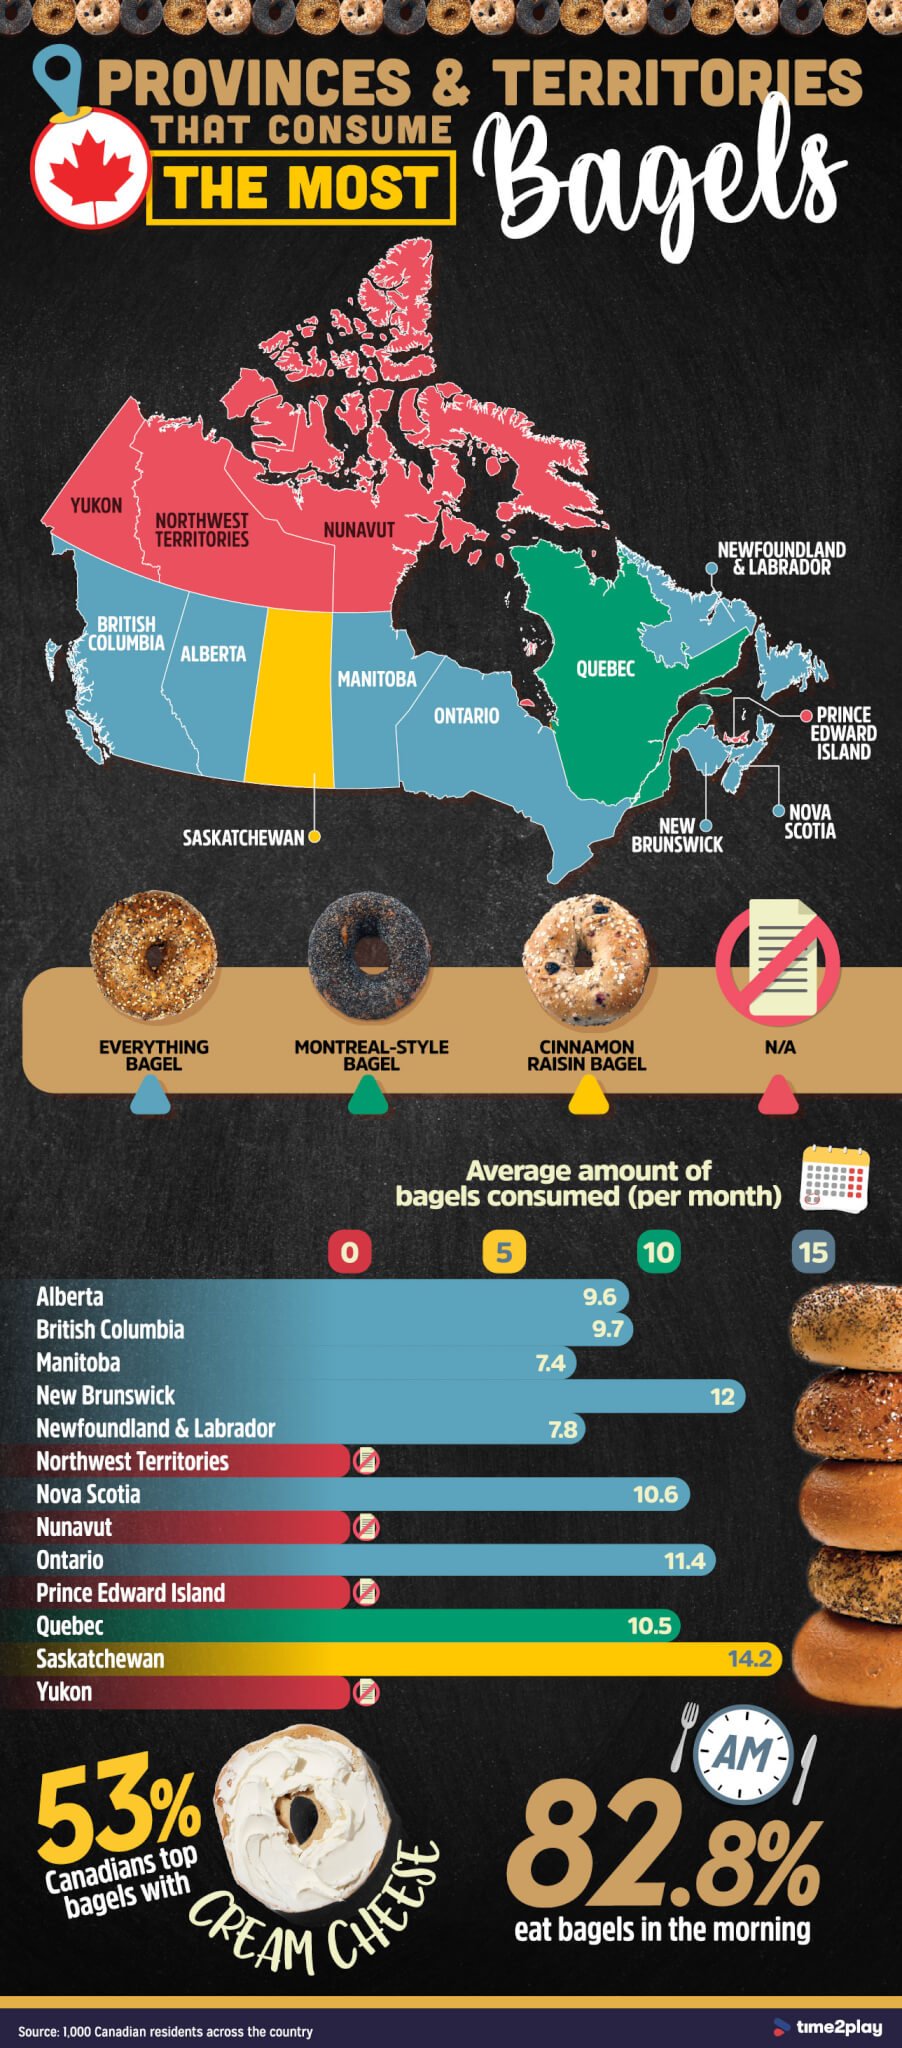 Which Province Or Territory Consumes The Most Bagels